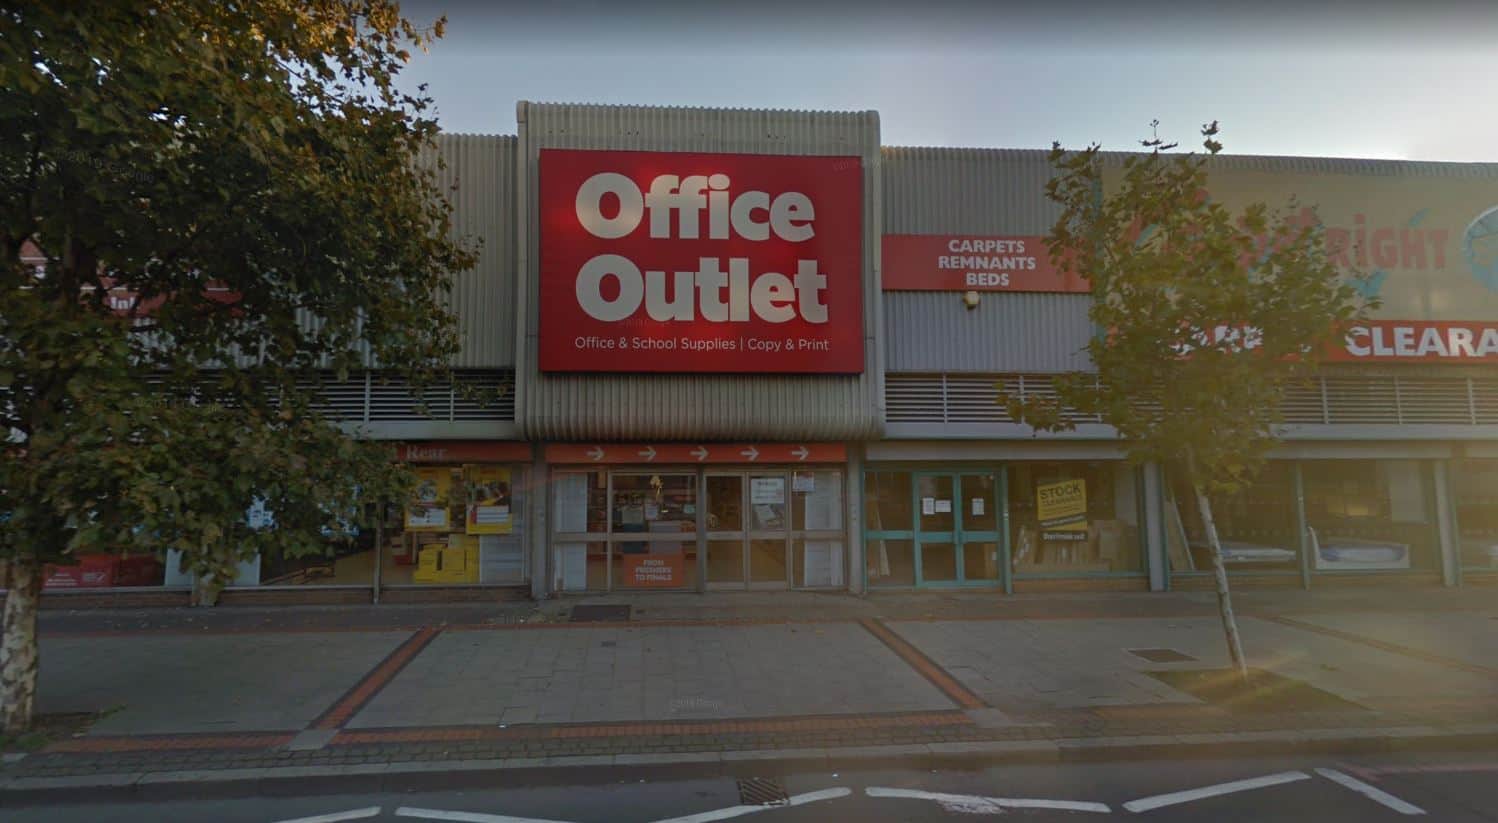 The outlet is expected to close on April 10 under the administrators' proposals